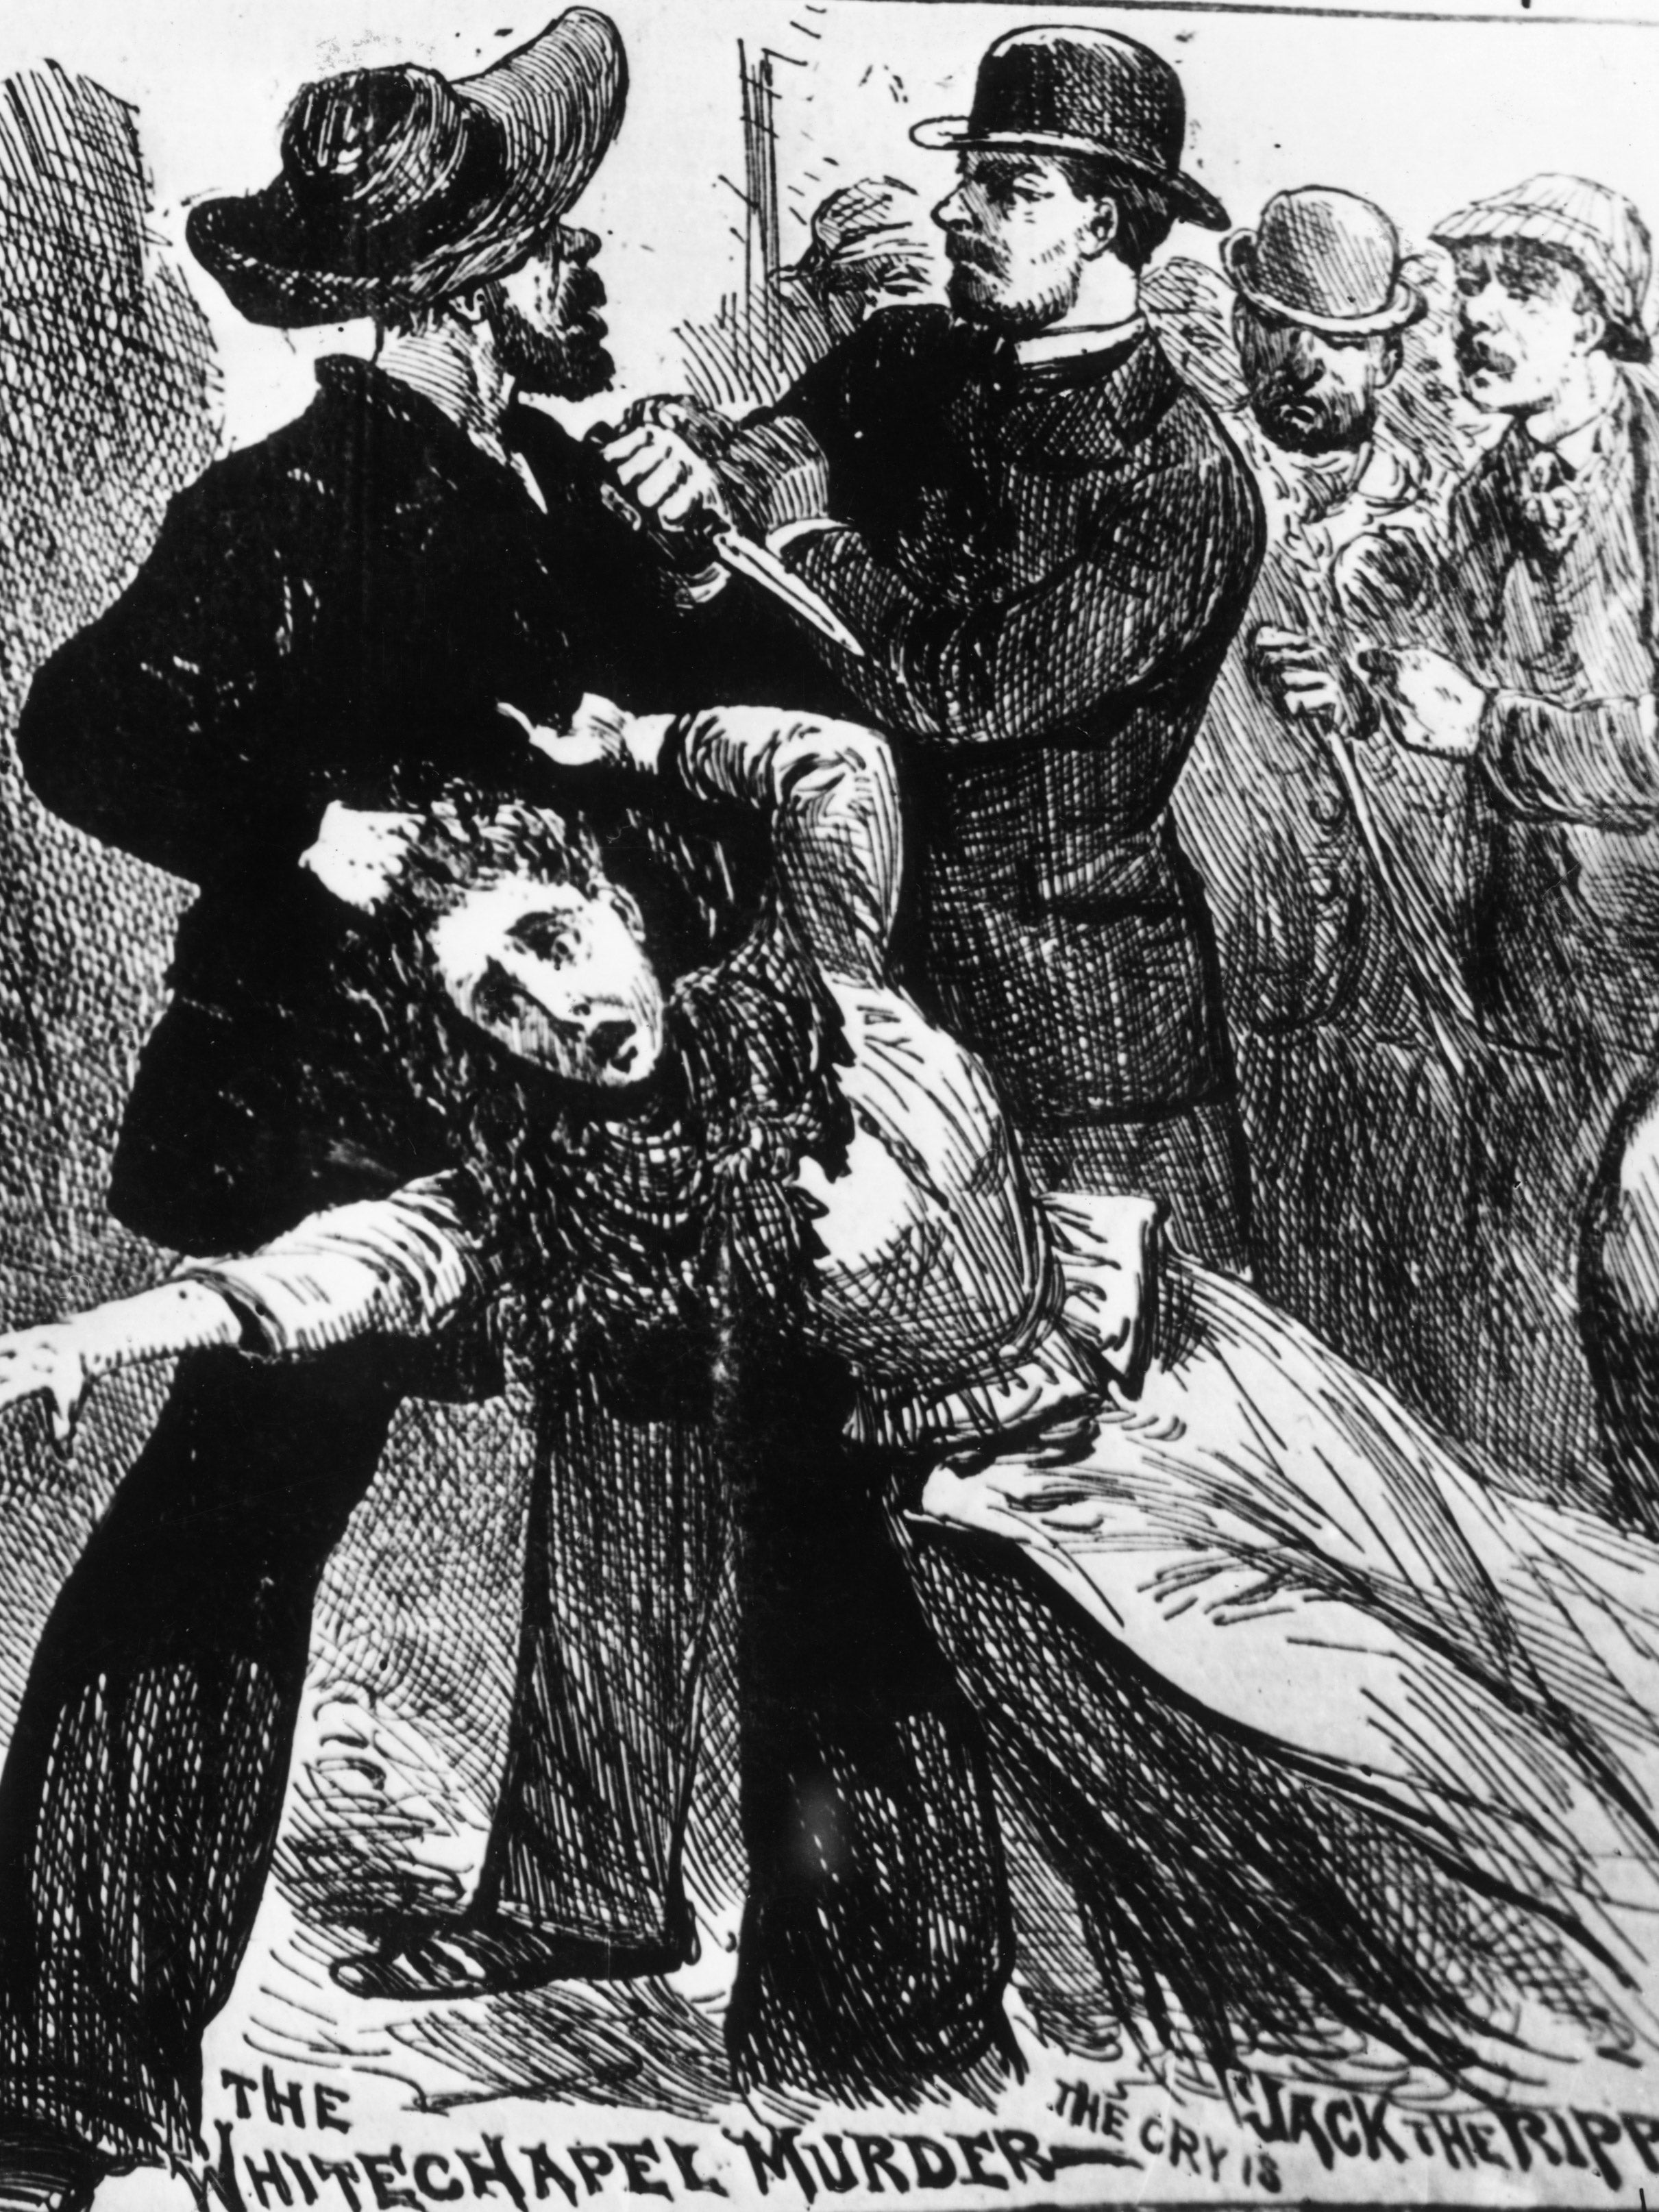 Jack the Ripper was a notorious serial killer who preyed on women in Whitechapel in the 1800s